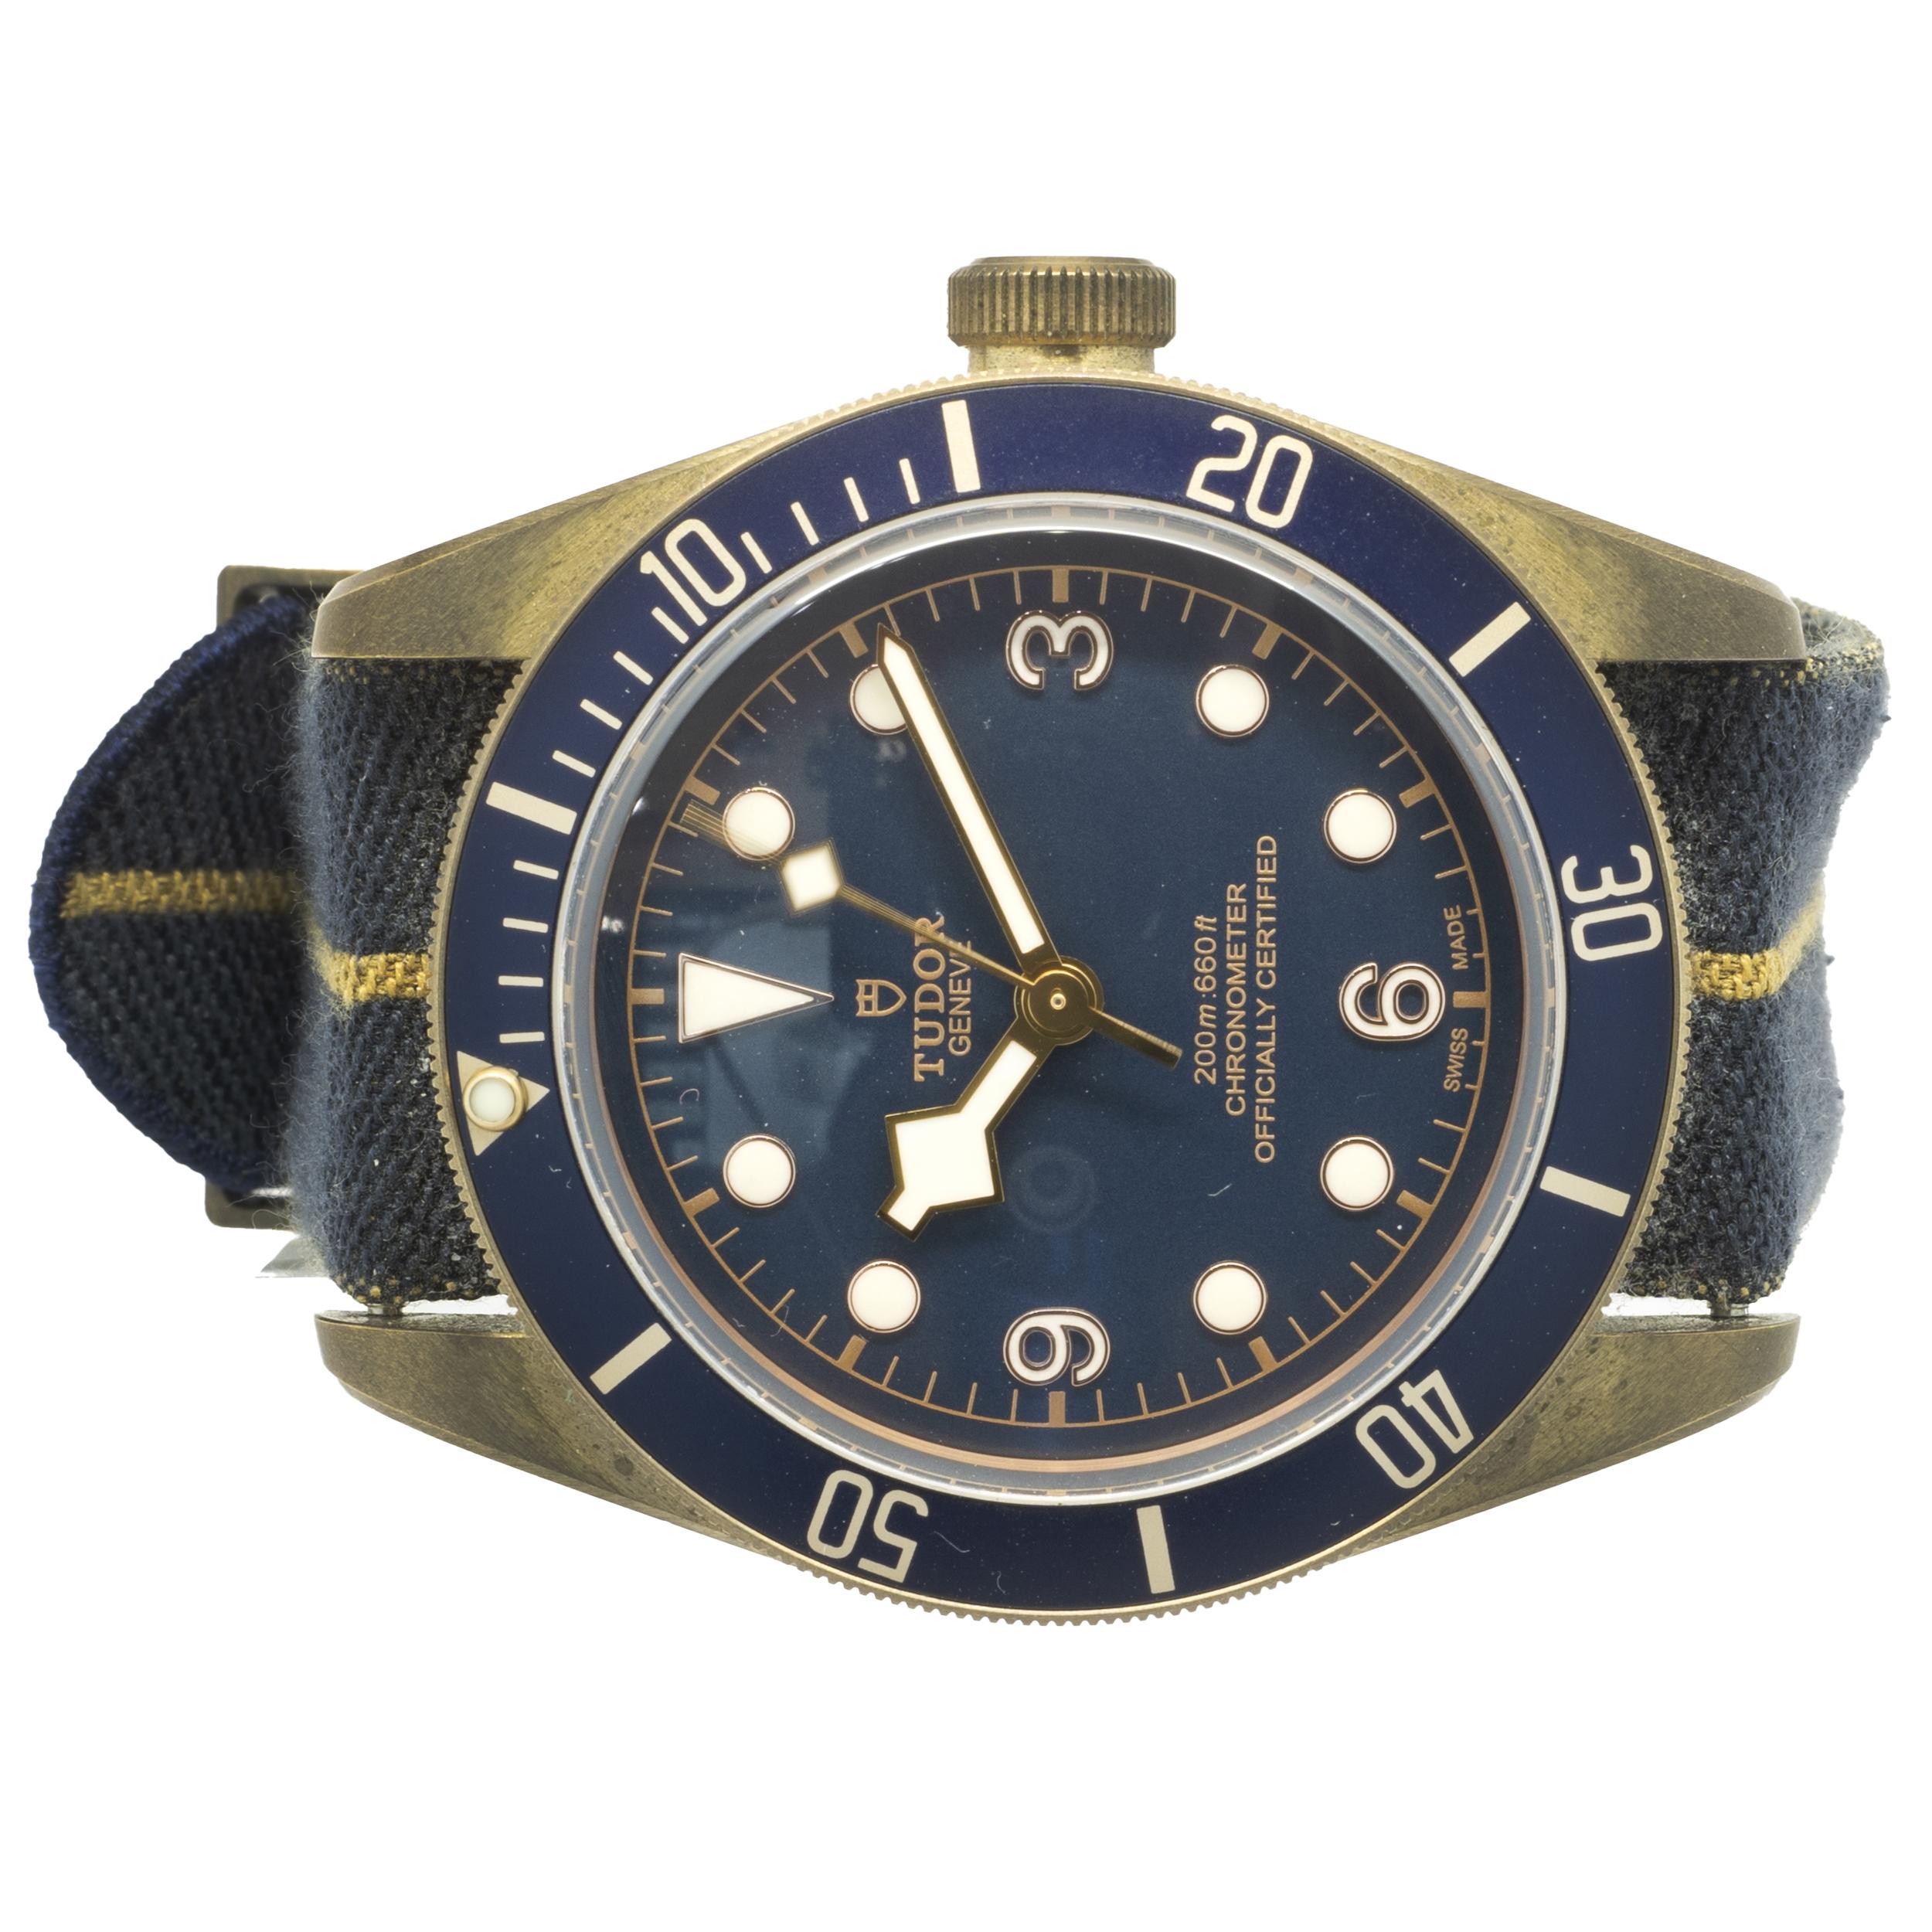 Movement: automatic
Function: hour, minutes, seconds, date, bi-directional timing bezel
Case: round 43mm bronze case, screw-down crown, sapphire protective crystal, blue bezel
Dial: blue luminous dot dial
Band: Nato strap
Serial #: I982XXX
Reference